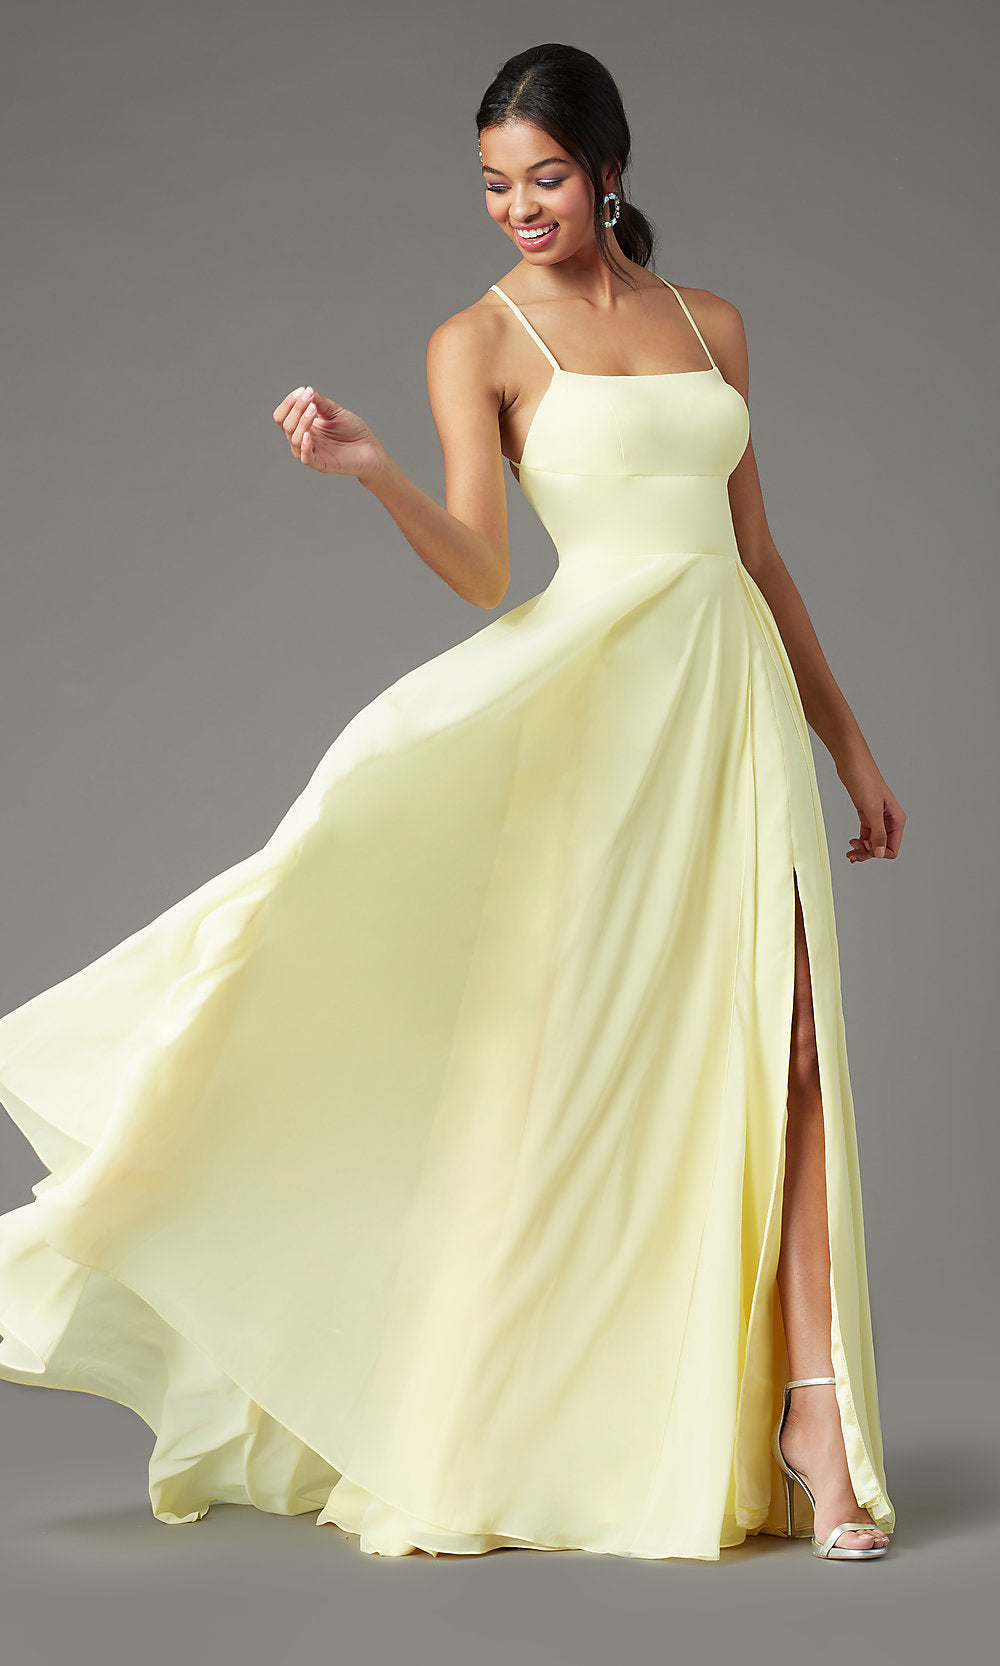 Daffodil Long Square-Neck Formal Prom Dress by PromGirl